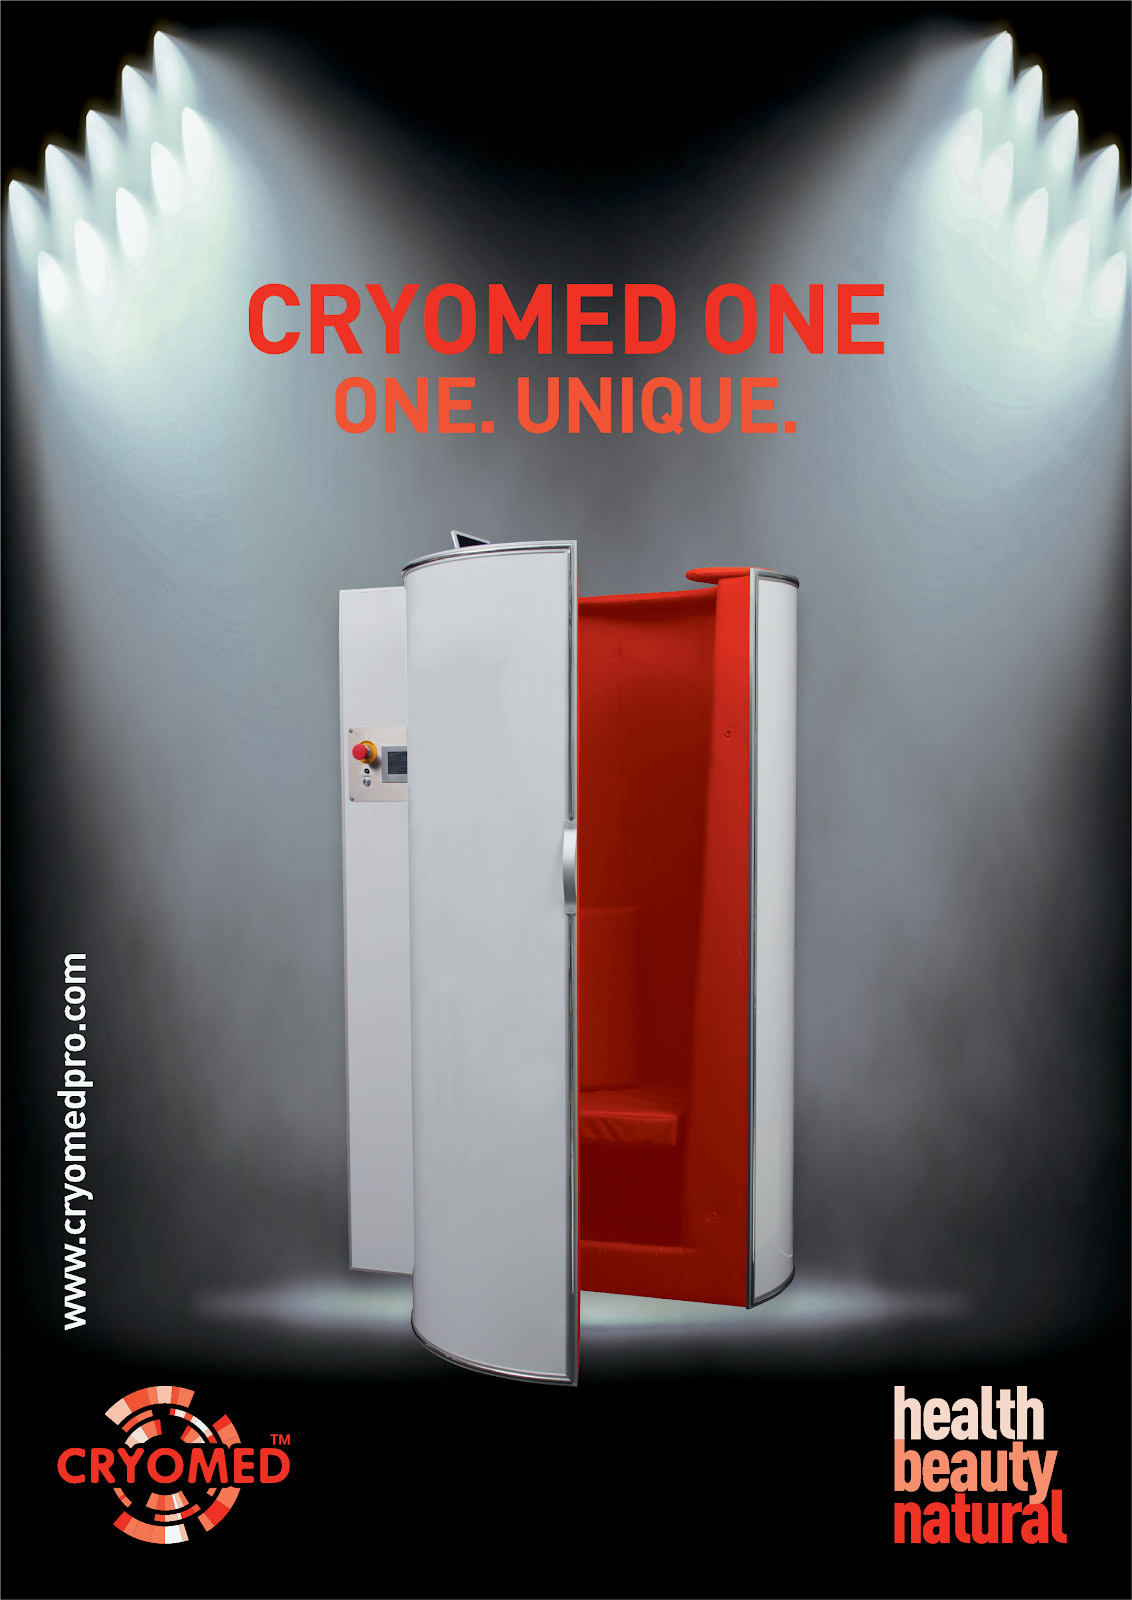 Affiche Cryomed A0 - 20 euro